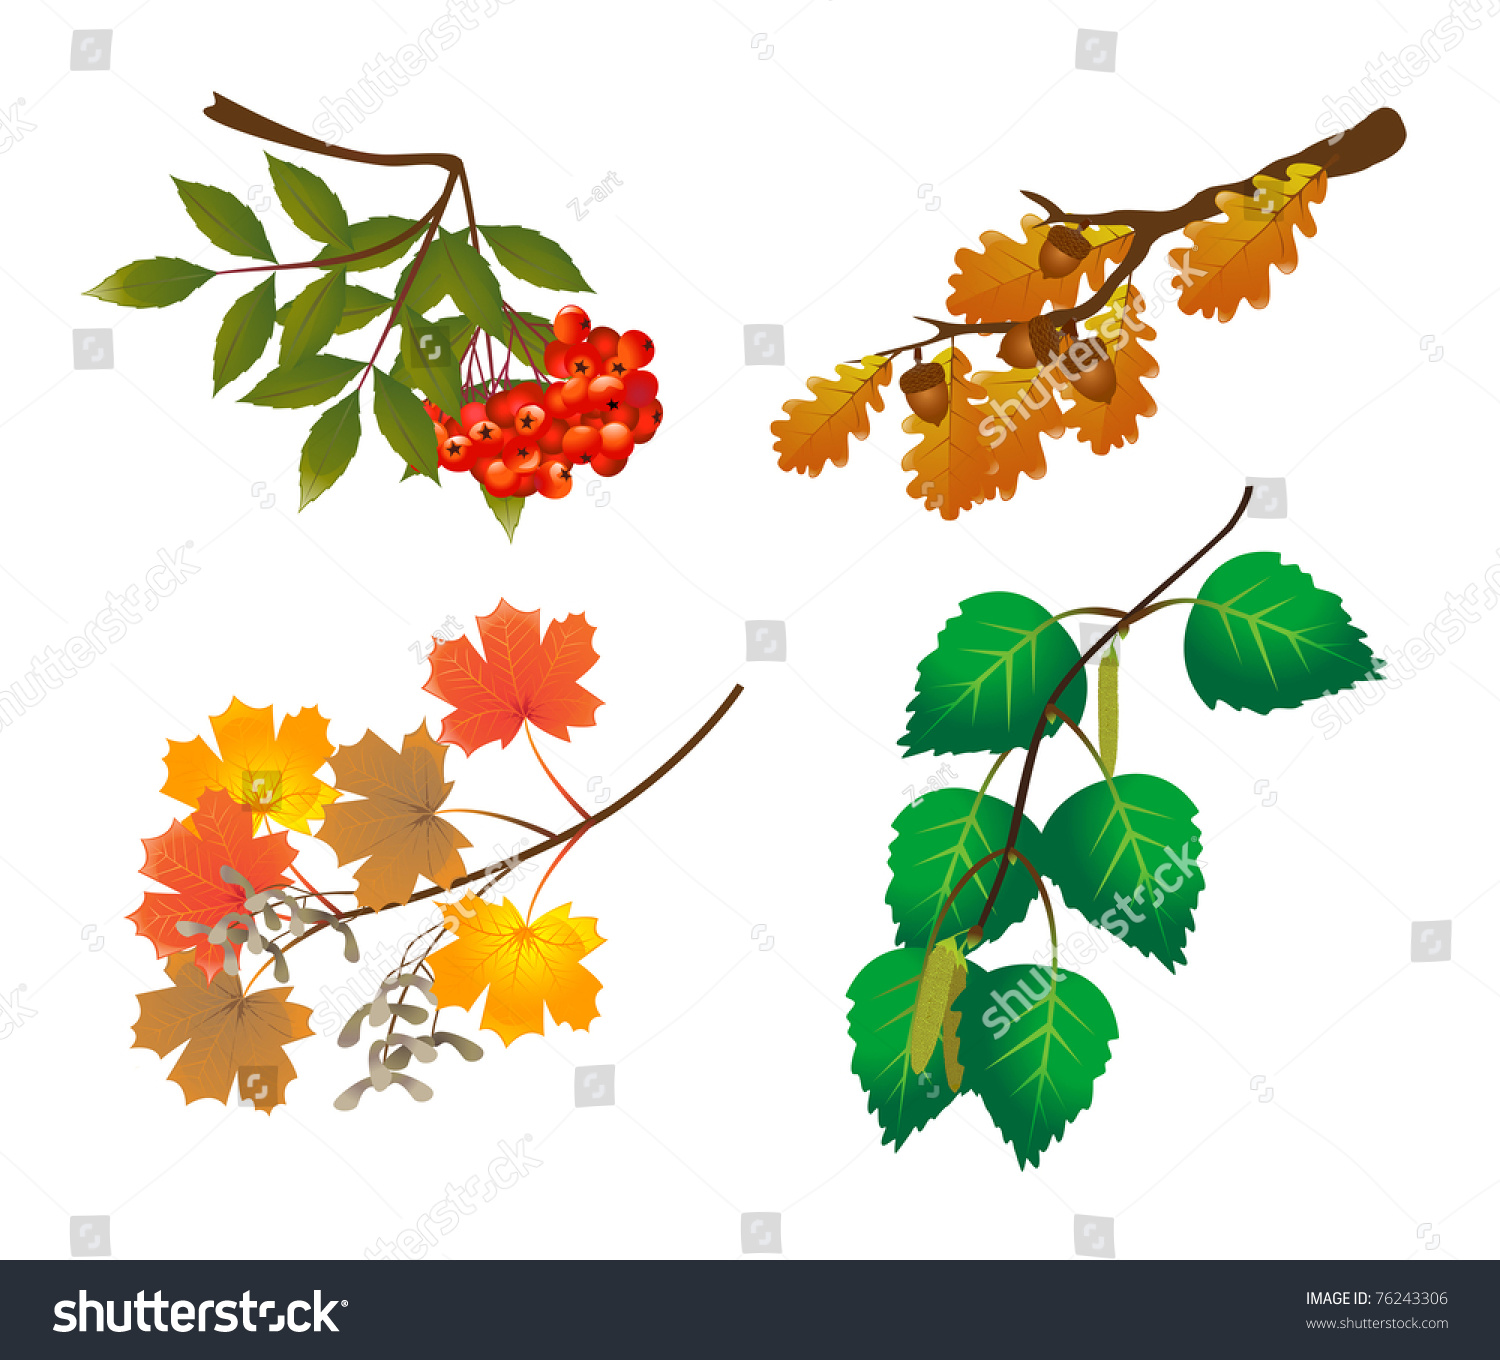 Branches Of Trees Stock Vector Illustration 76243306 : Shutterstock